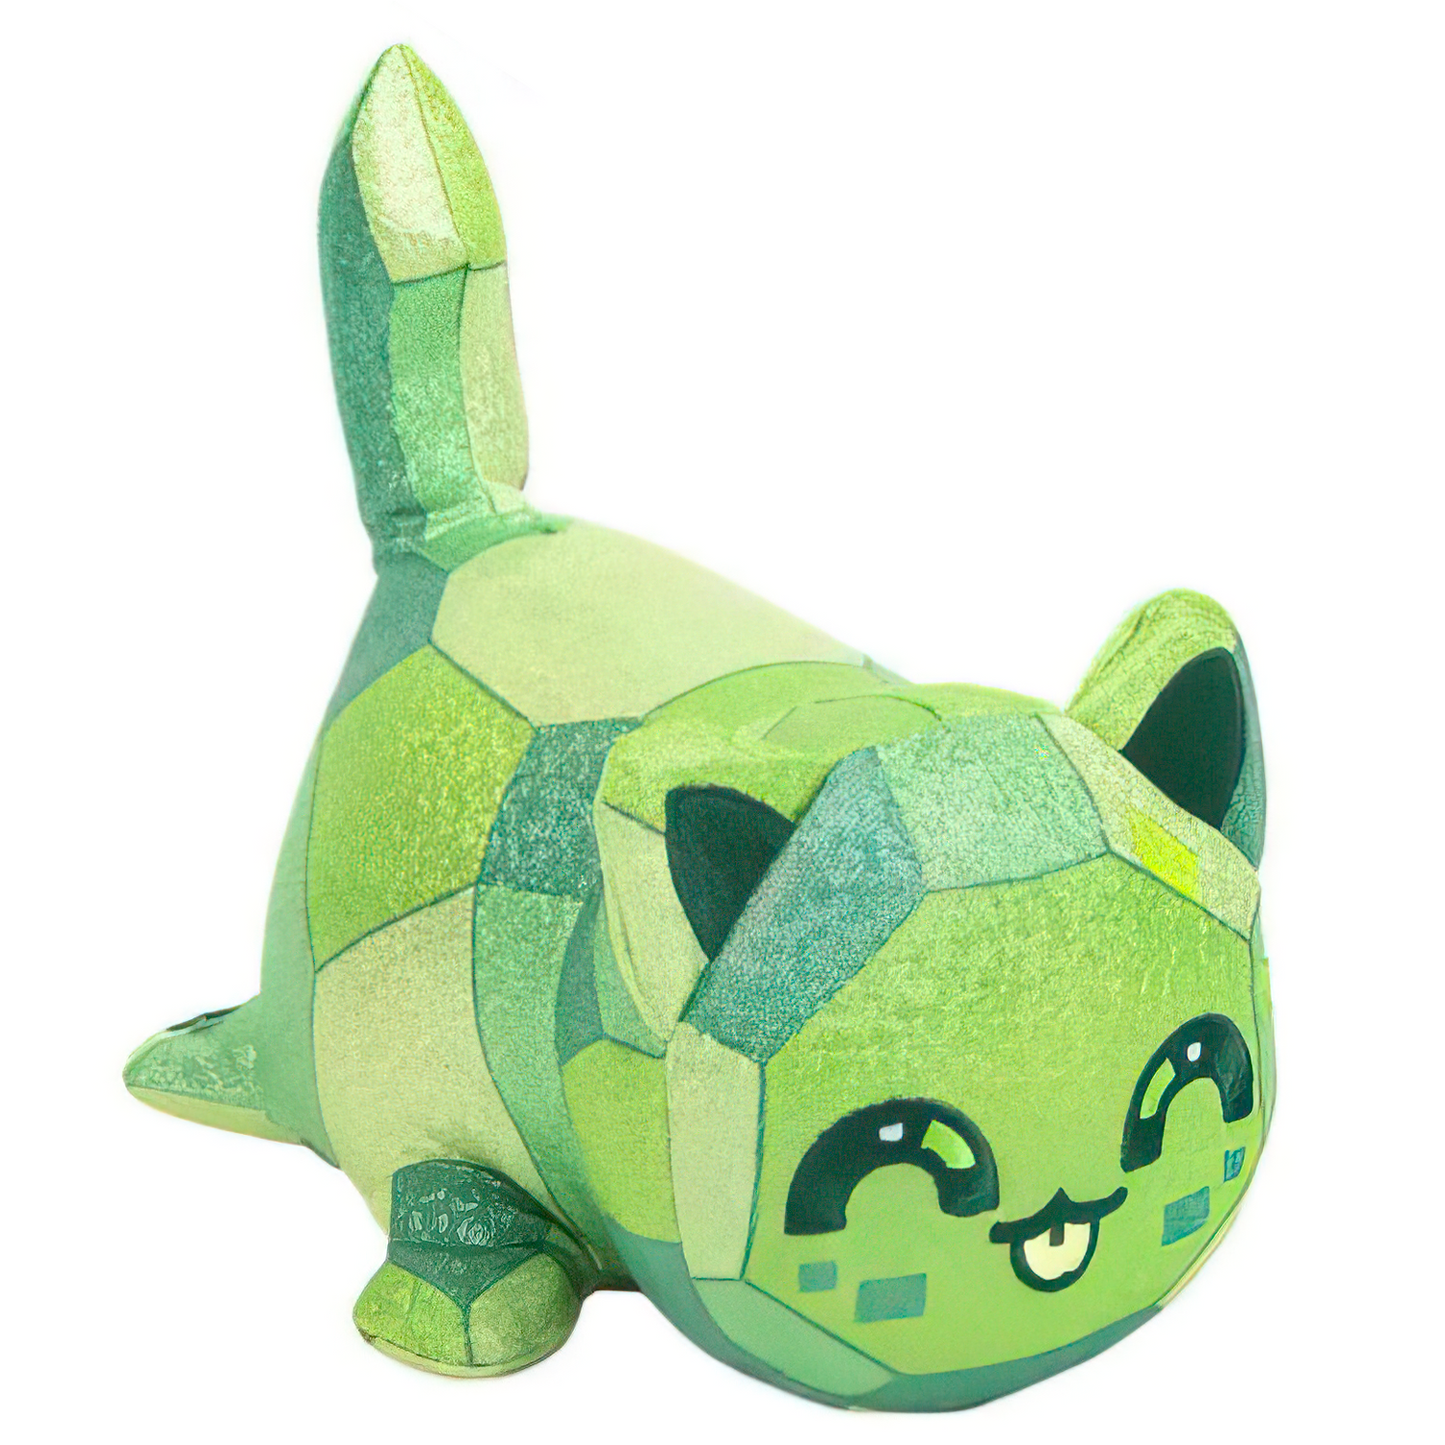 EMERALD CAT - MeeMeows Litter 4 from Aphmau (BRAND NEW) Cute Kitty Plushie!